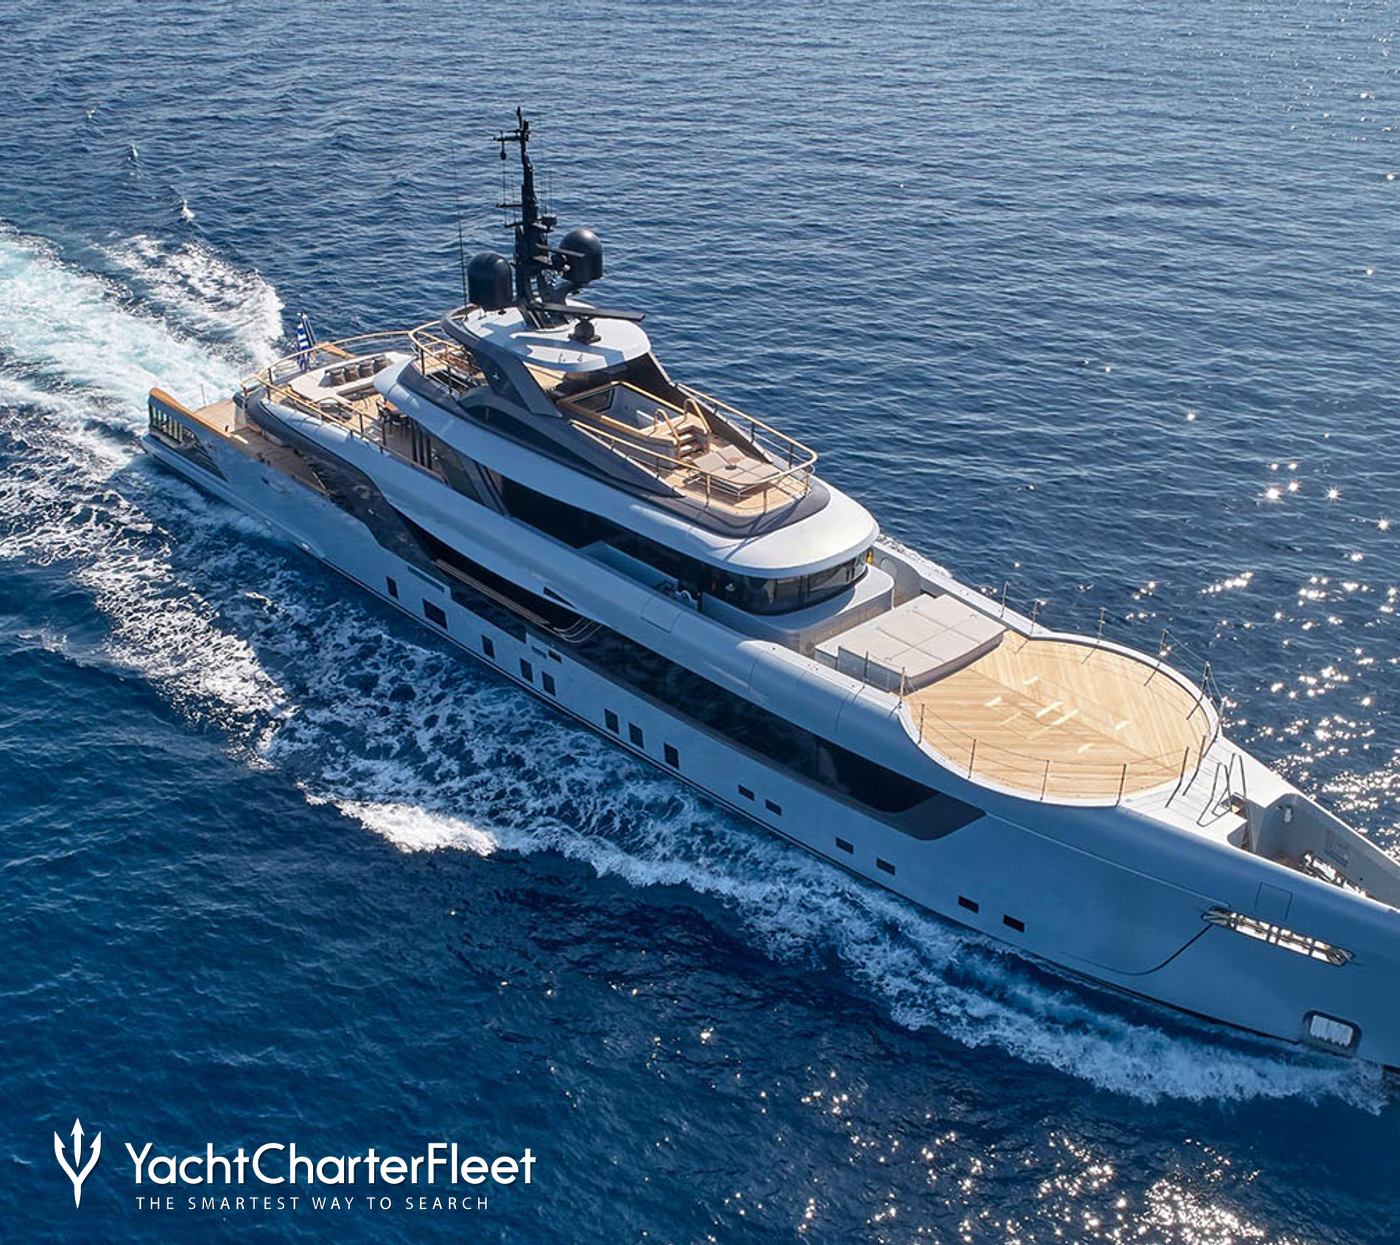 Top 10 brand new yachts to charter in 2021 | YachtCharterFleet